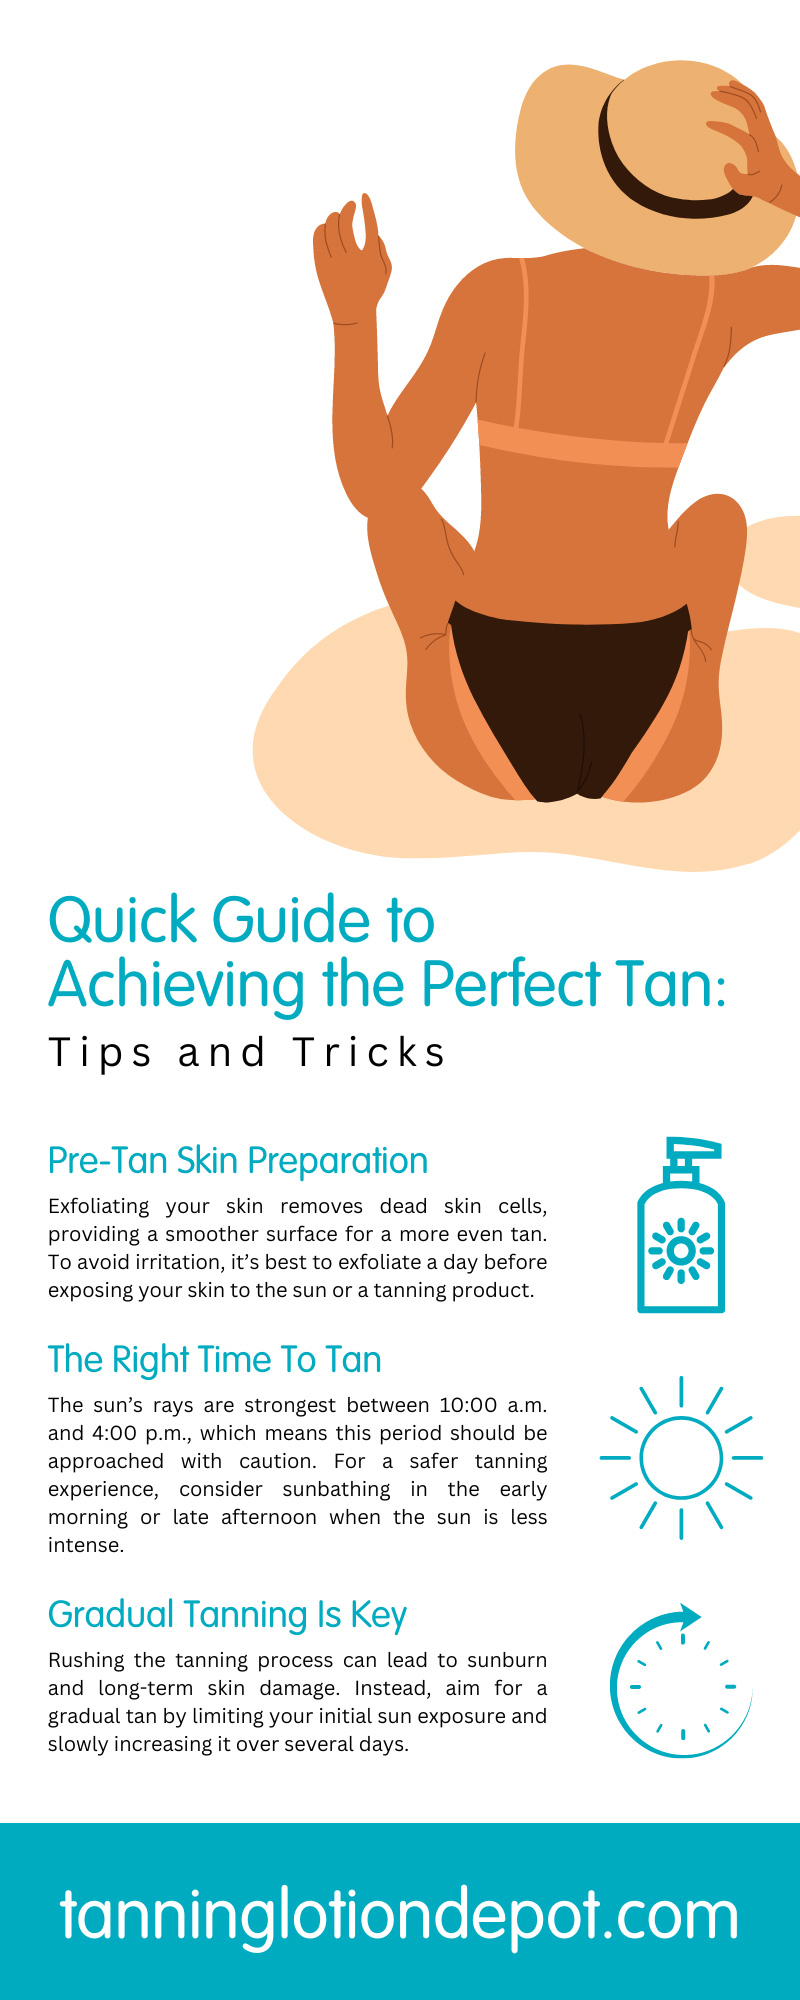 Quick Guide to Achieving the Perfect Tan: Tips and Tricks